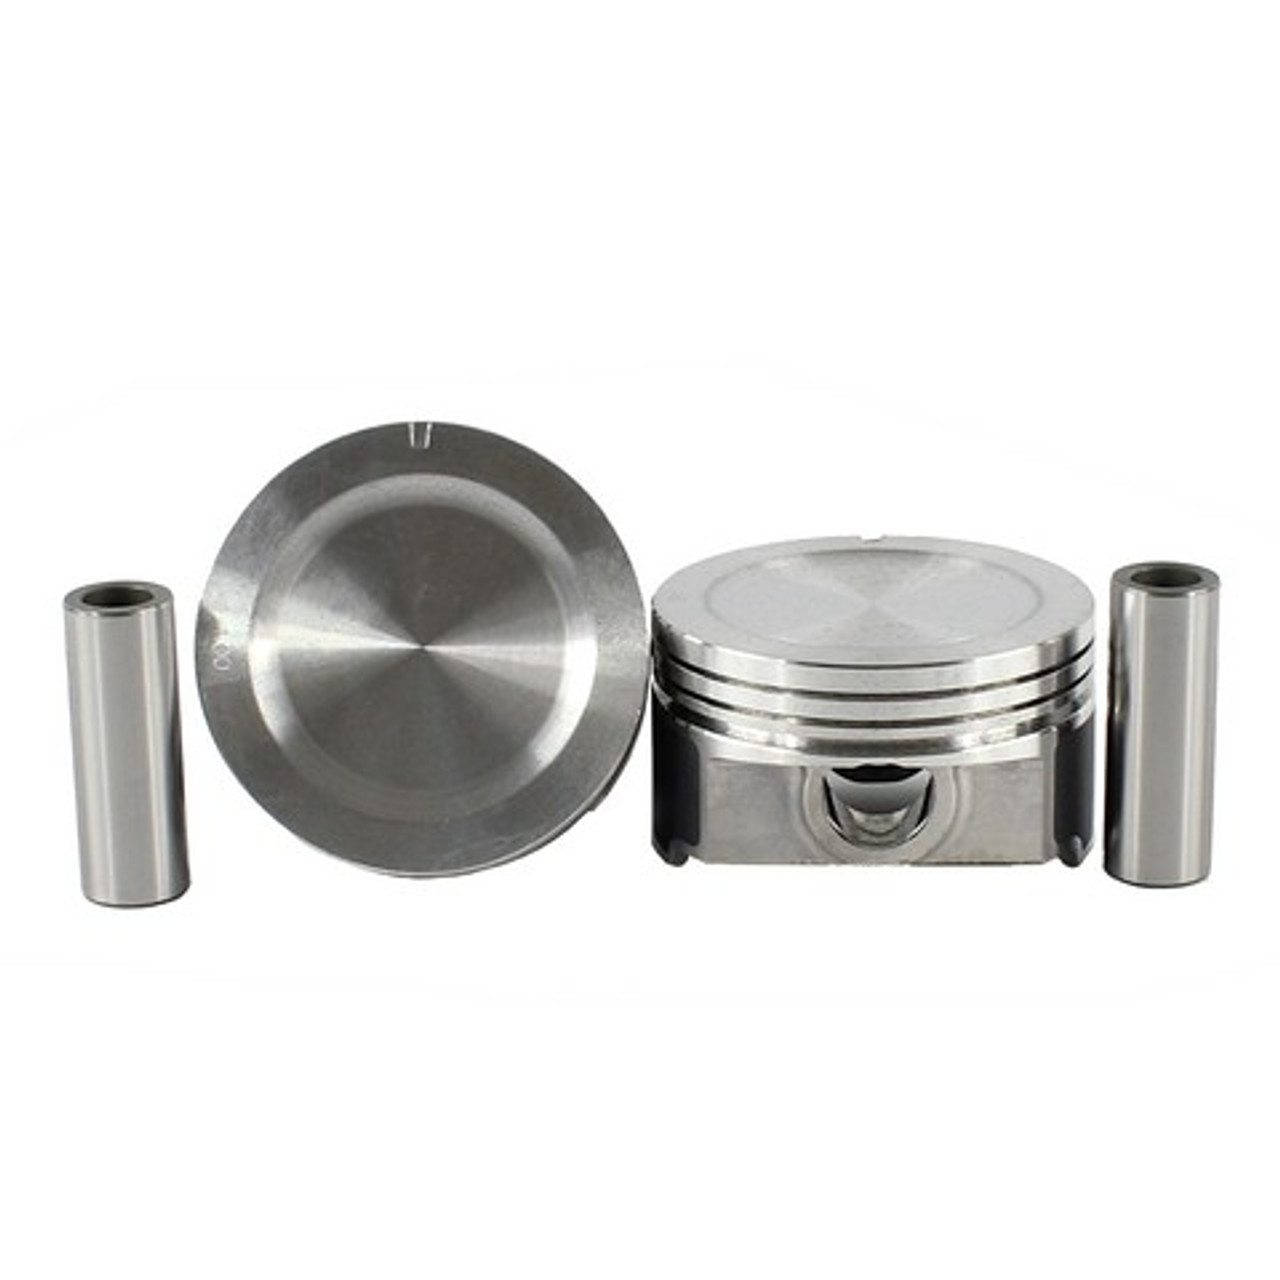 Piston Set 5.4L 2004 Ford Expedition - P4160.80